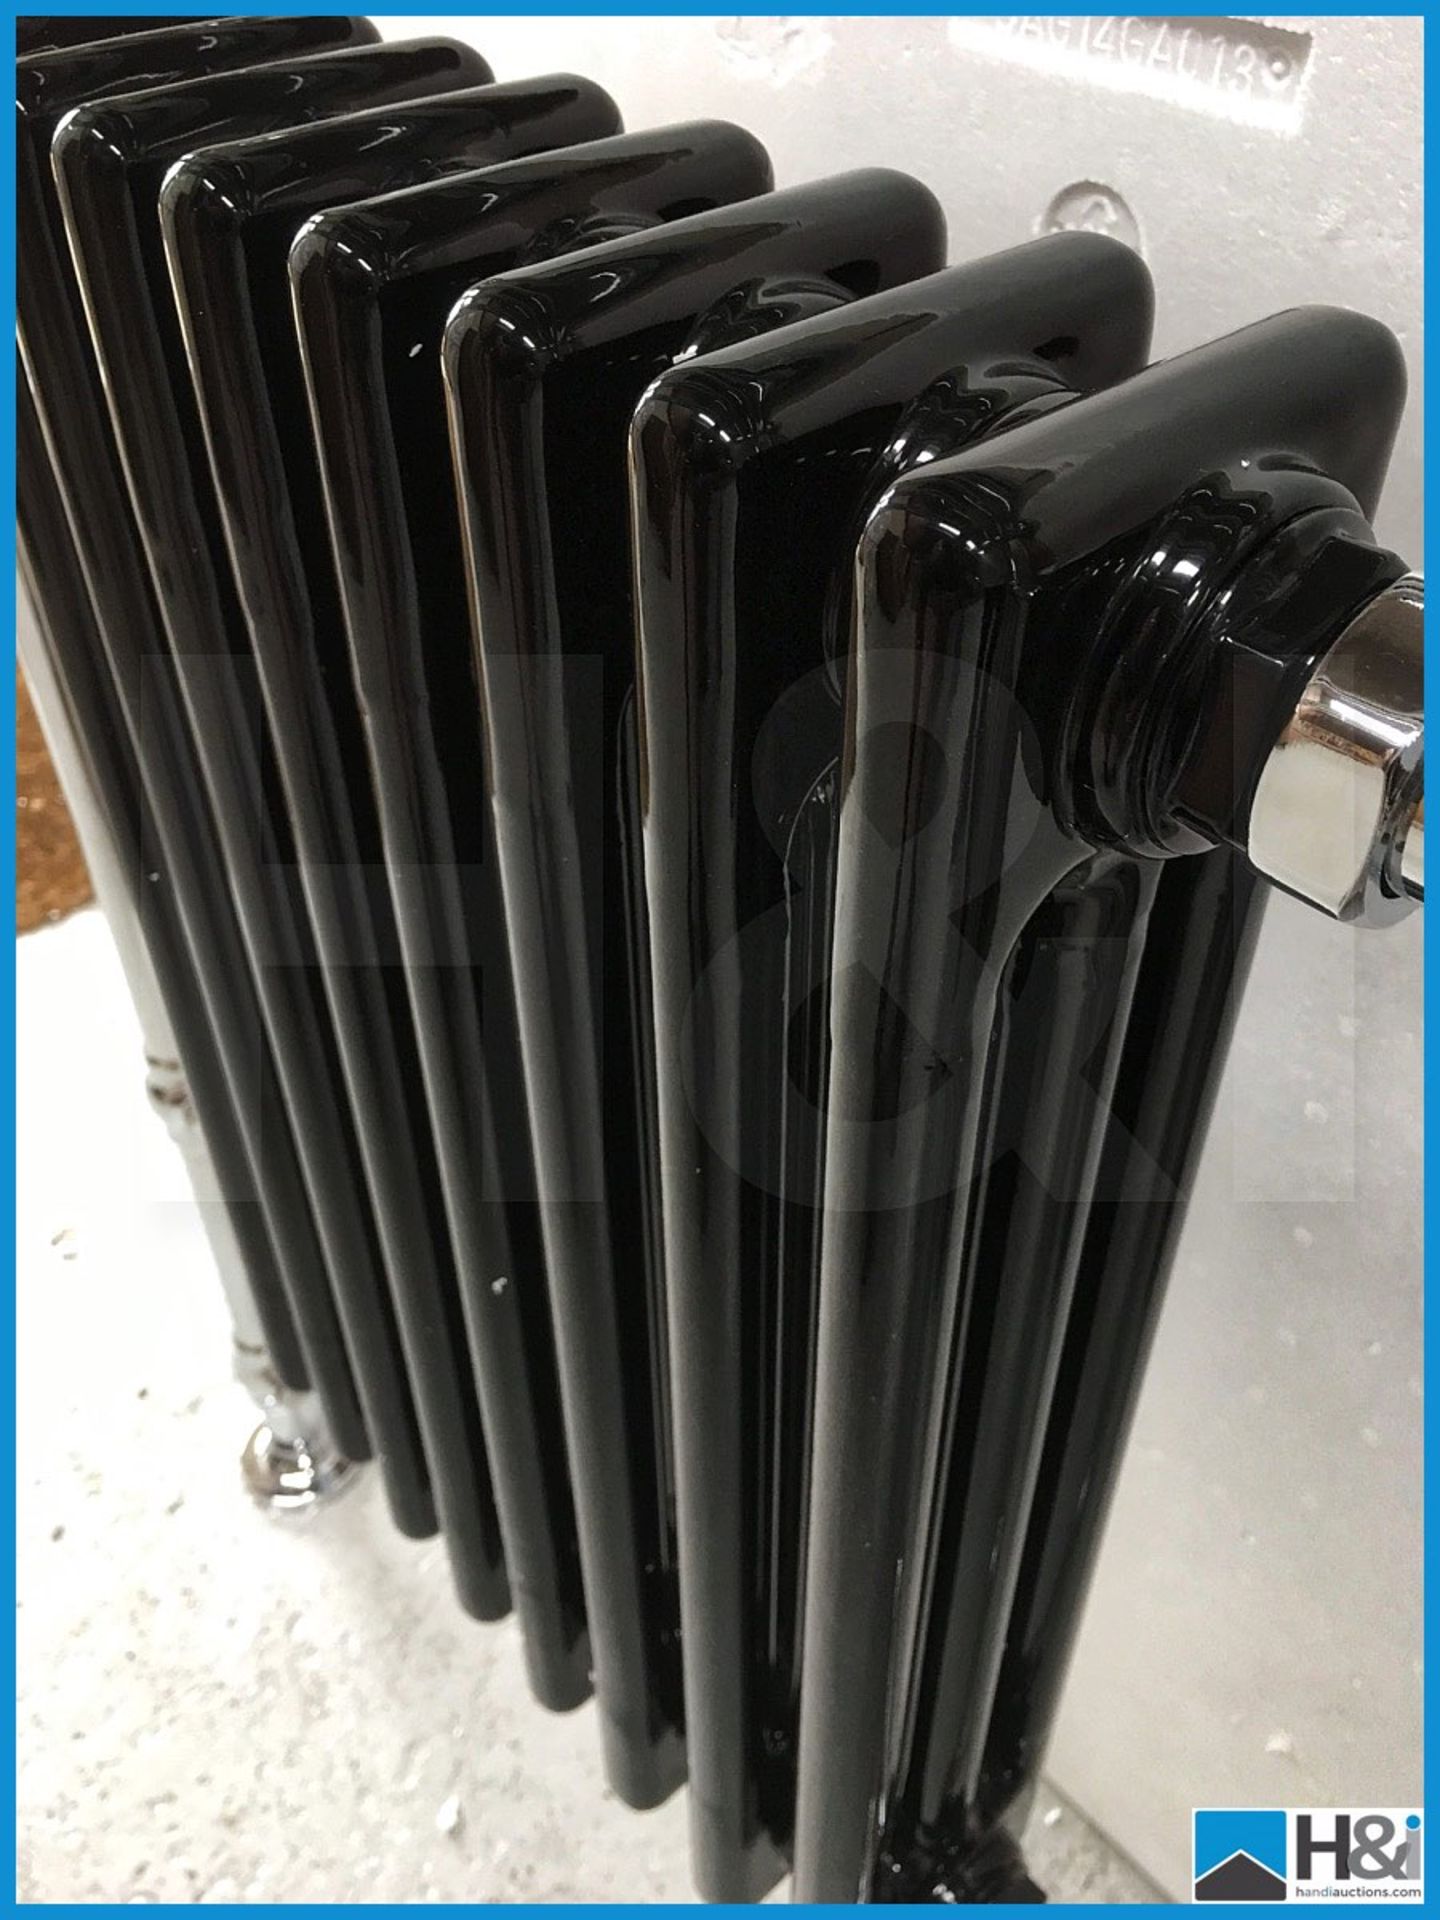 Designer centre column black traditional radiator with polished chrome rails. New and boxed. - Image 6 of 6